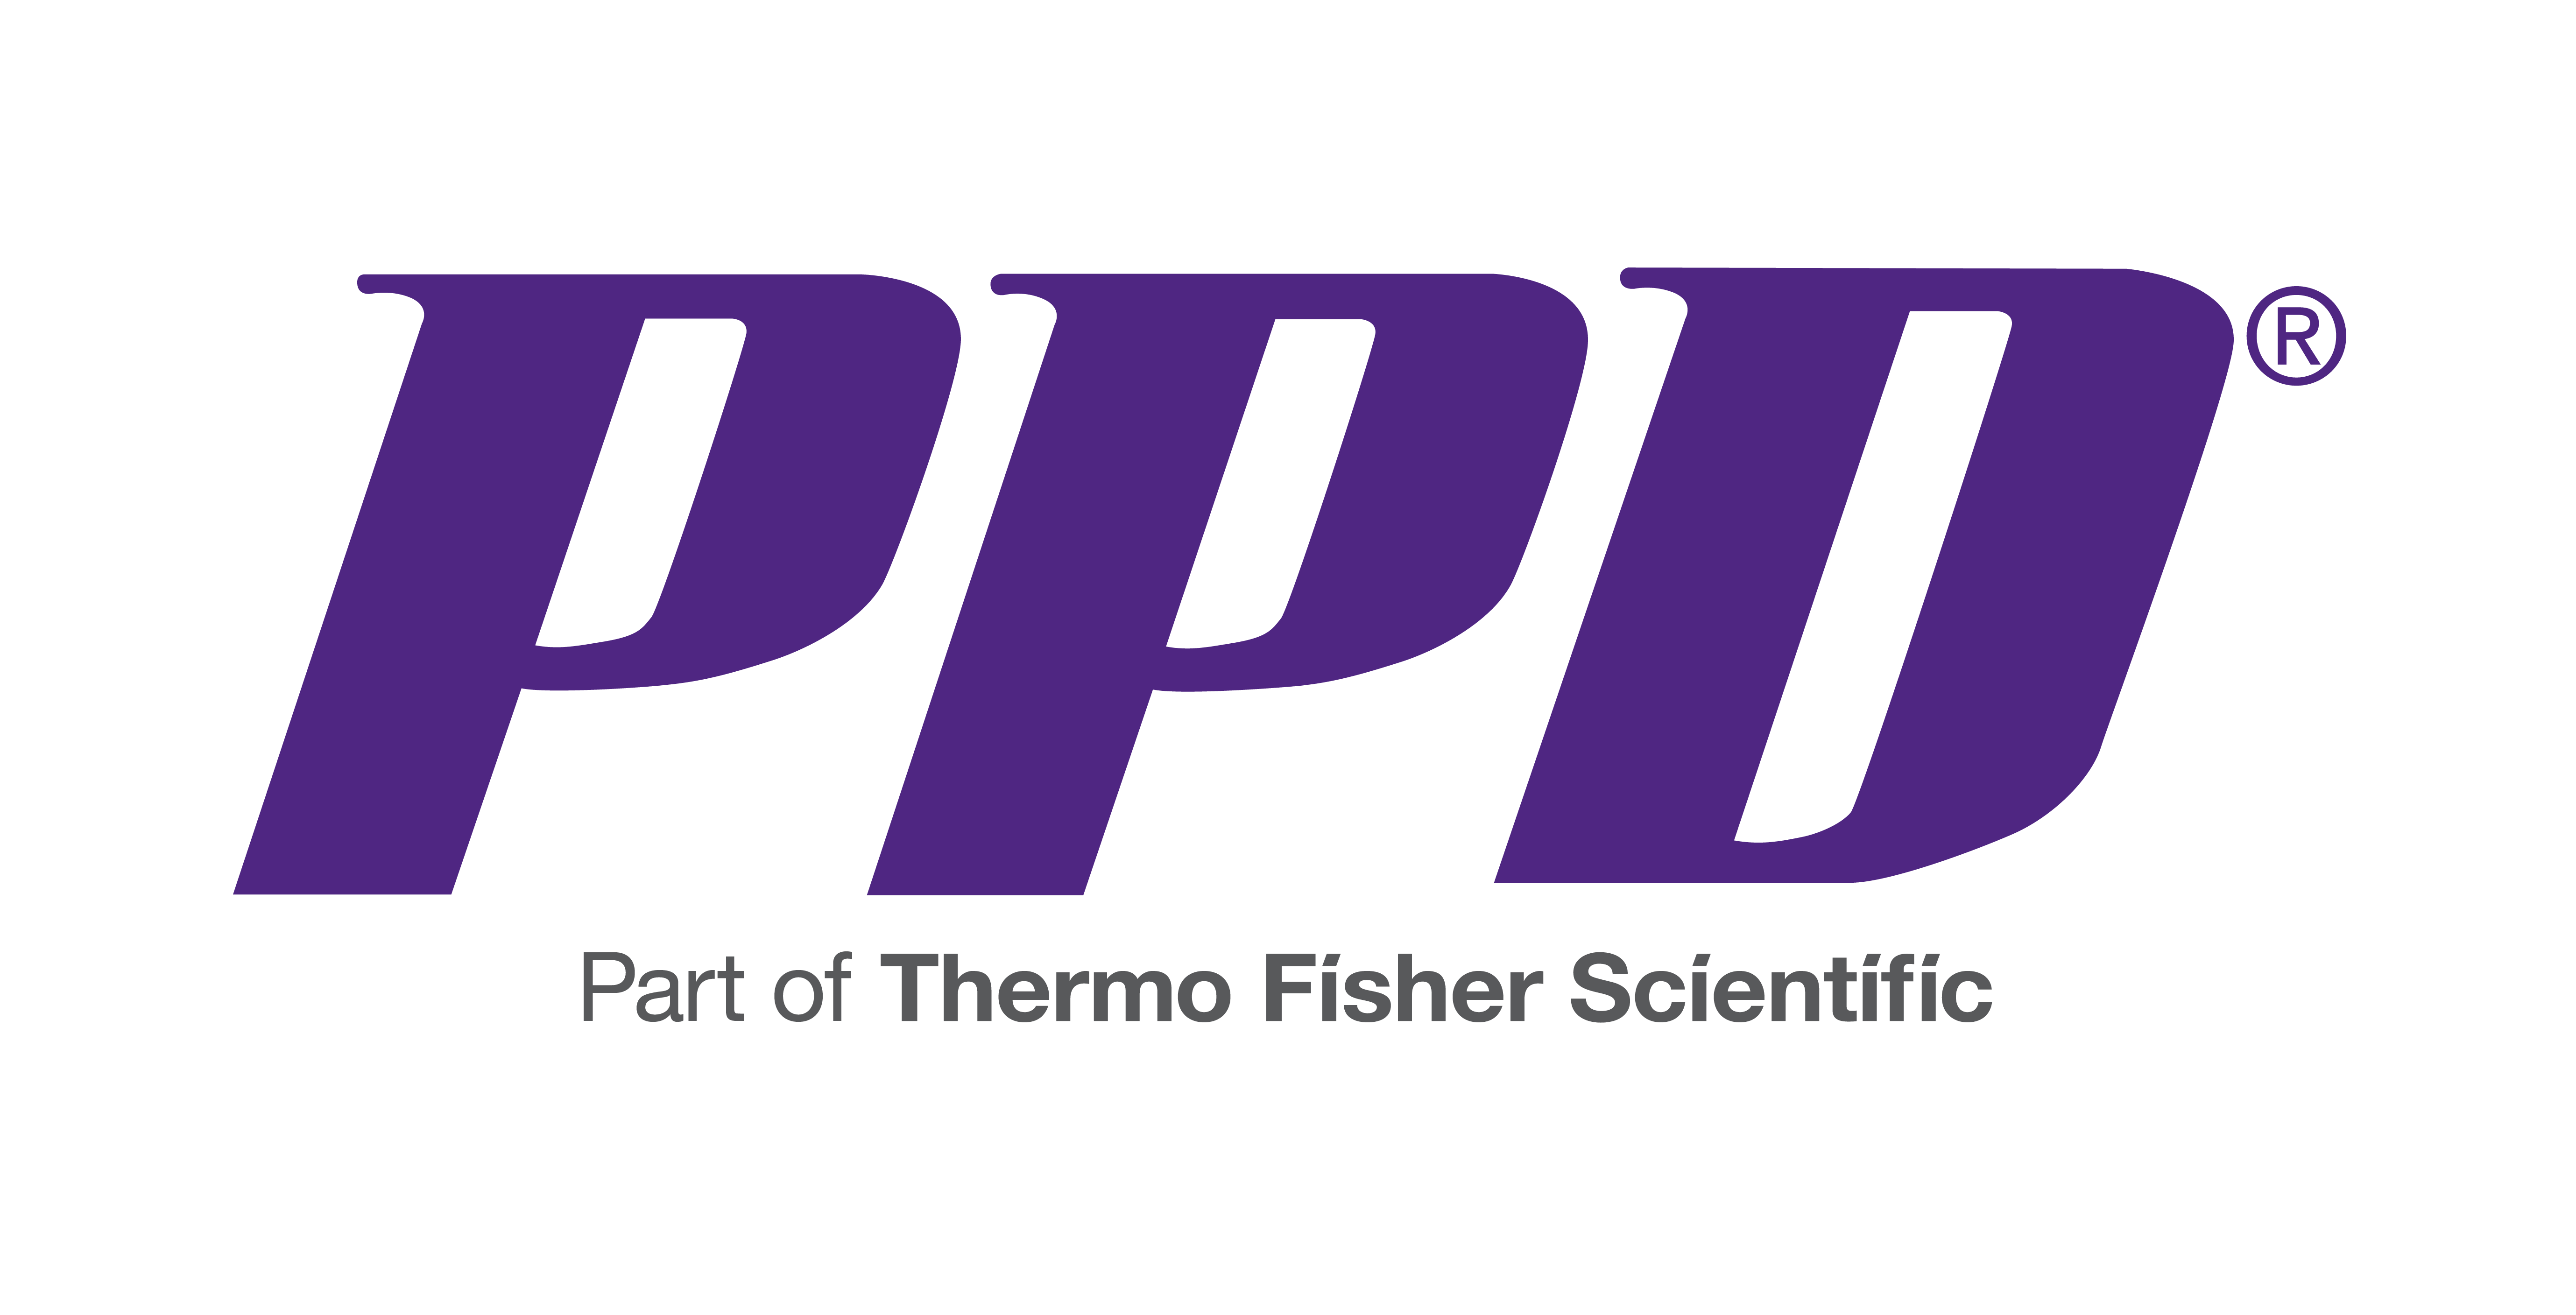 PPD Biotech Solutions, part of Thermo Fisher Scientific